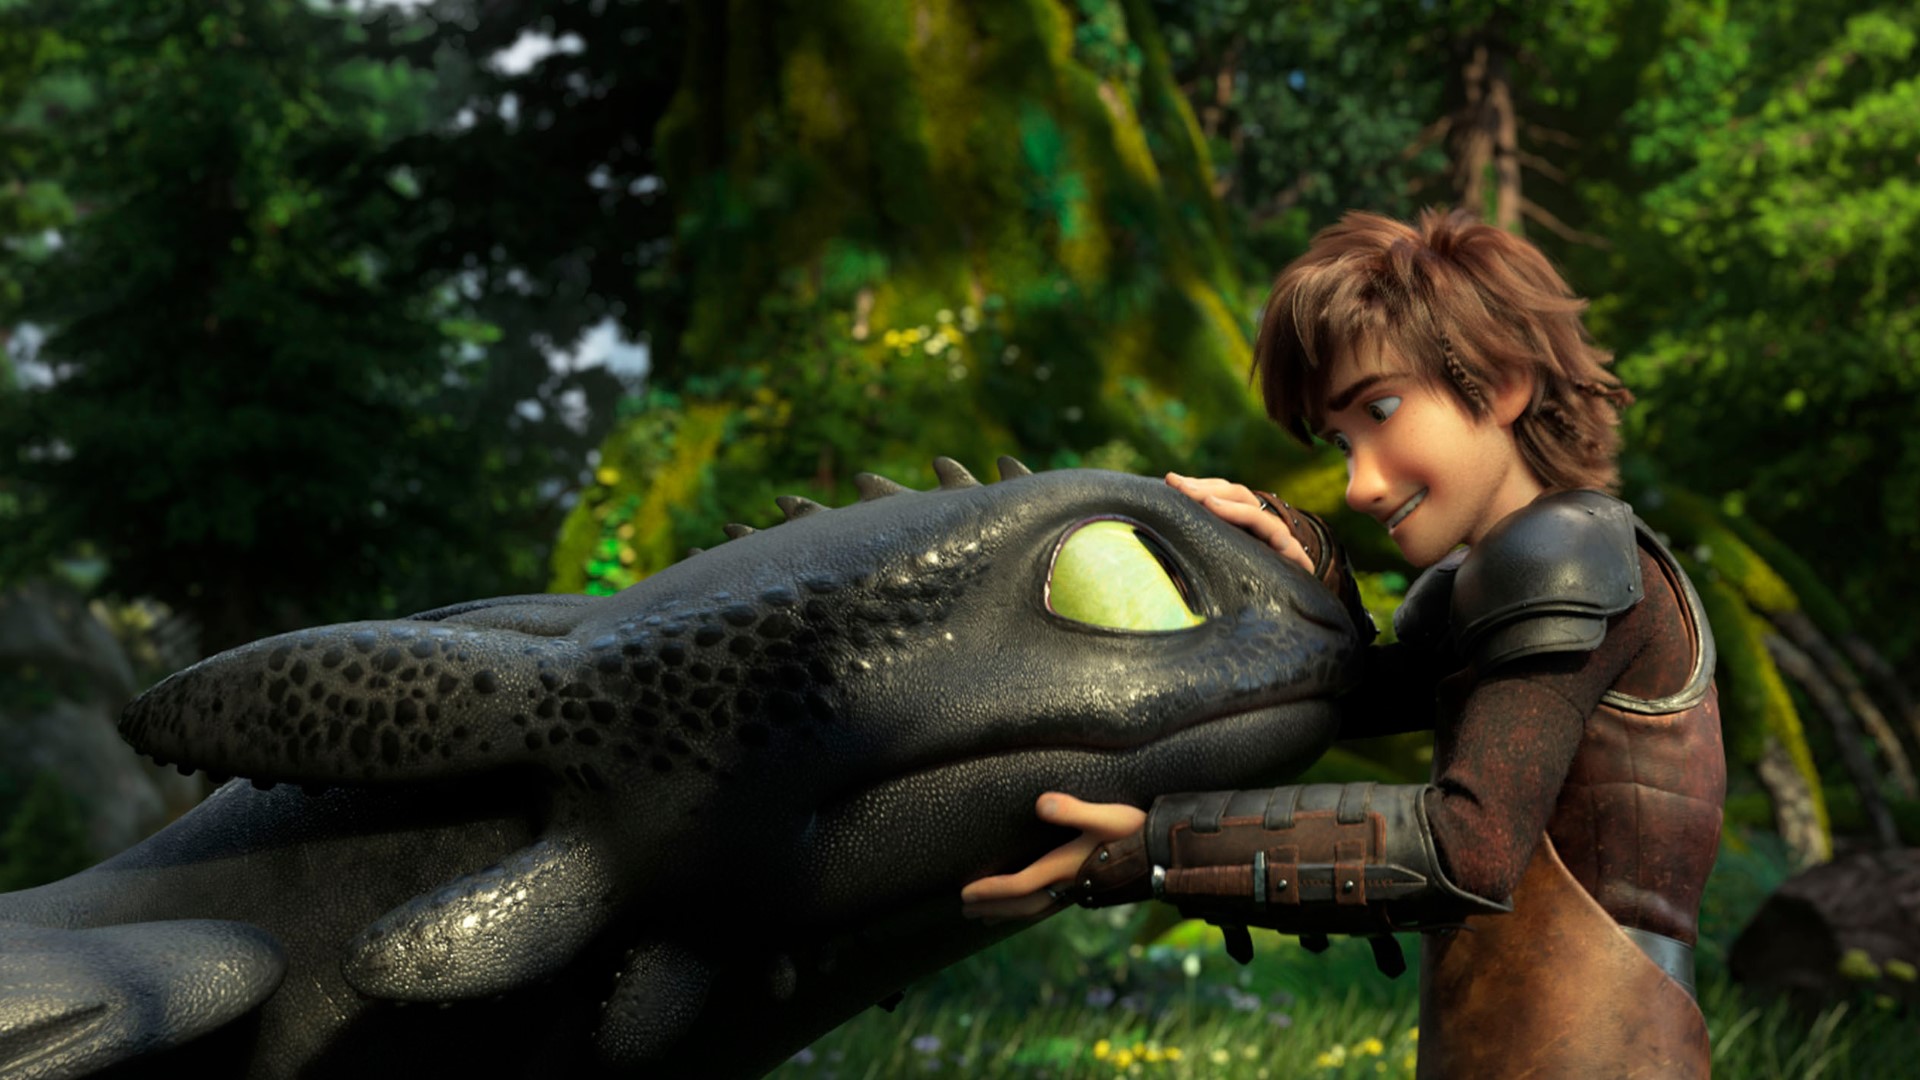 Director's Chair: 'How to Train Your Dragon: The Hidden World' and 'Fighting With My Family' hit the box office. Plus, more classic movies to see on the big screen in Central Texas this weekend.